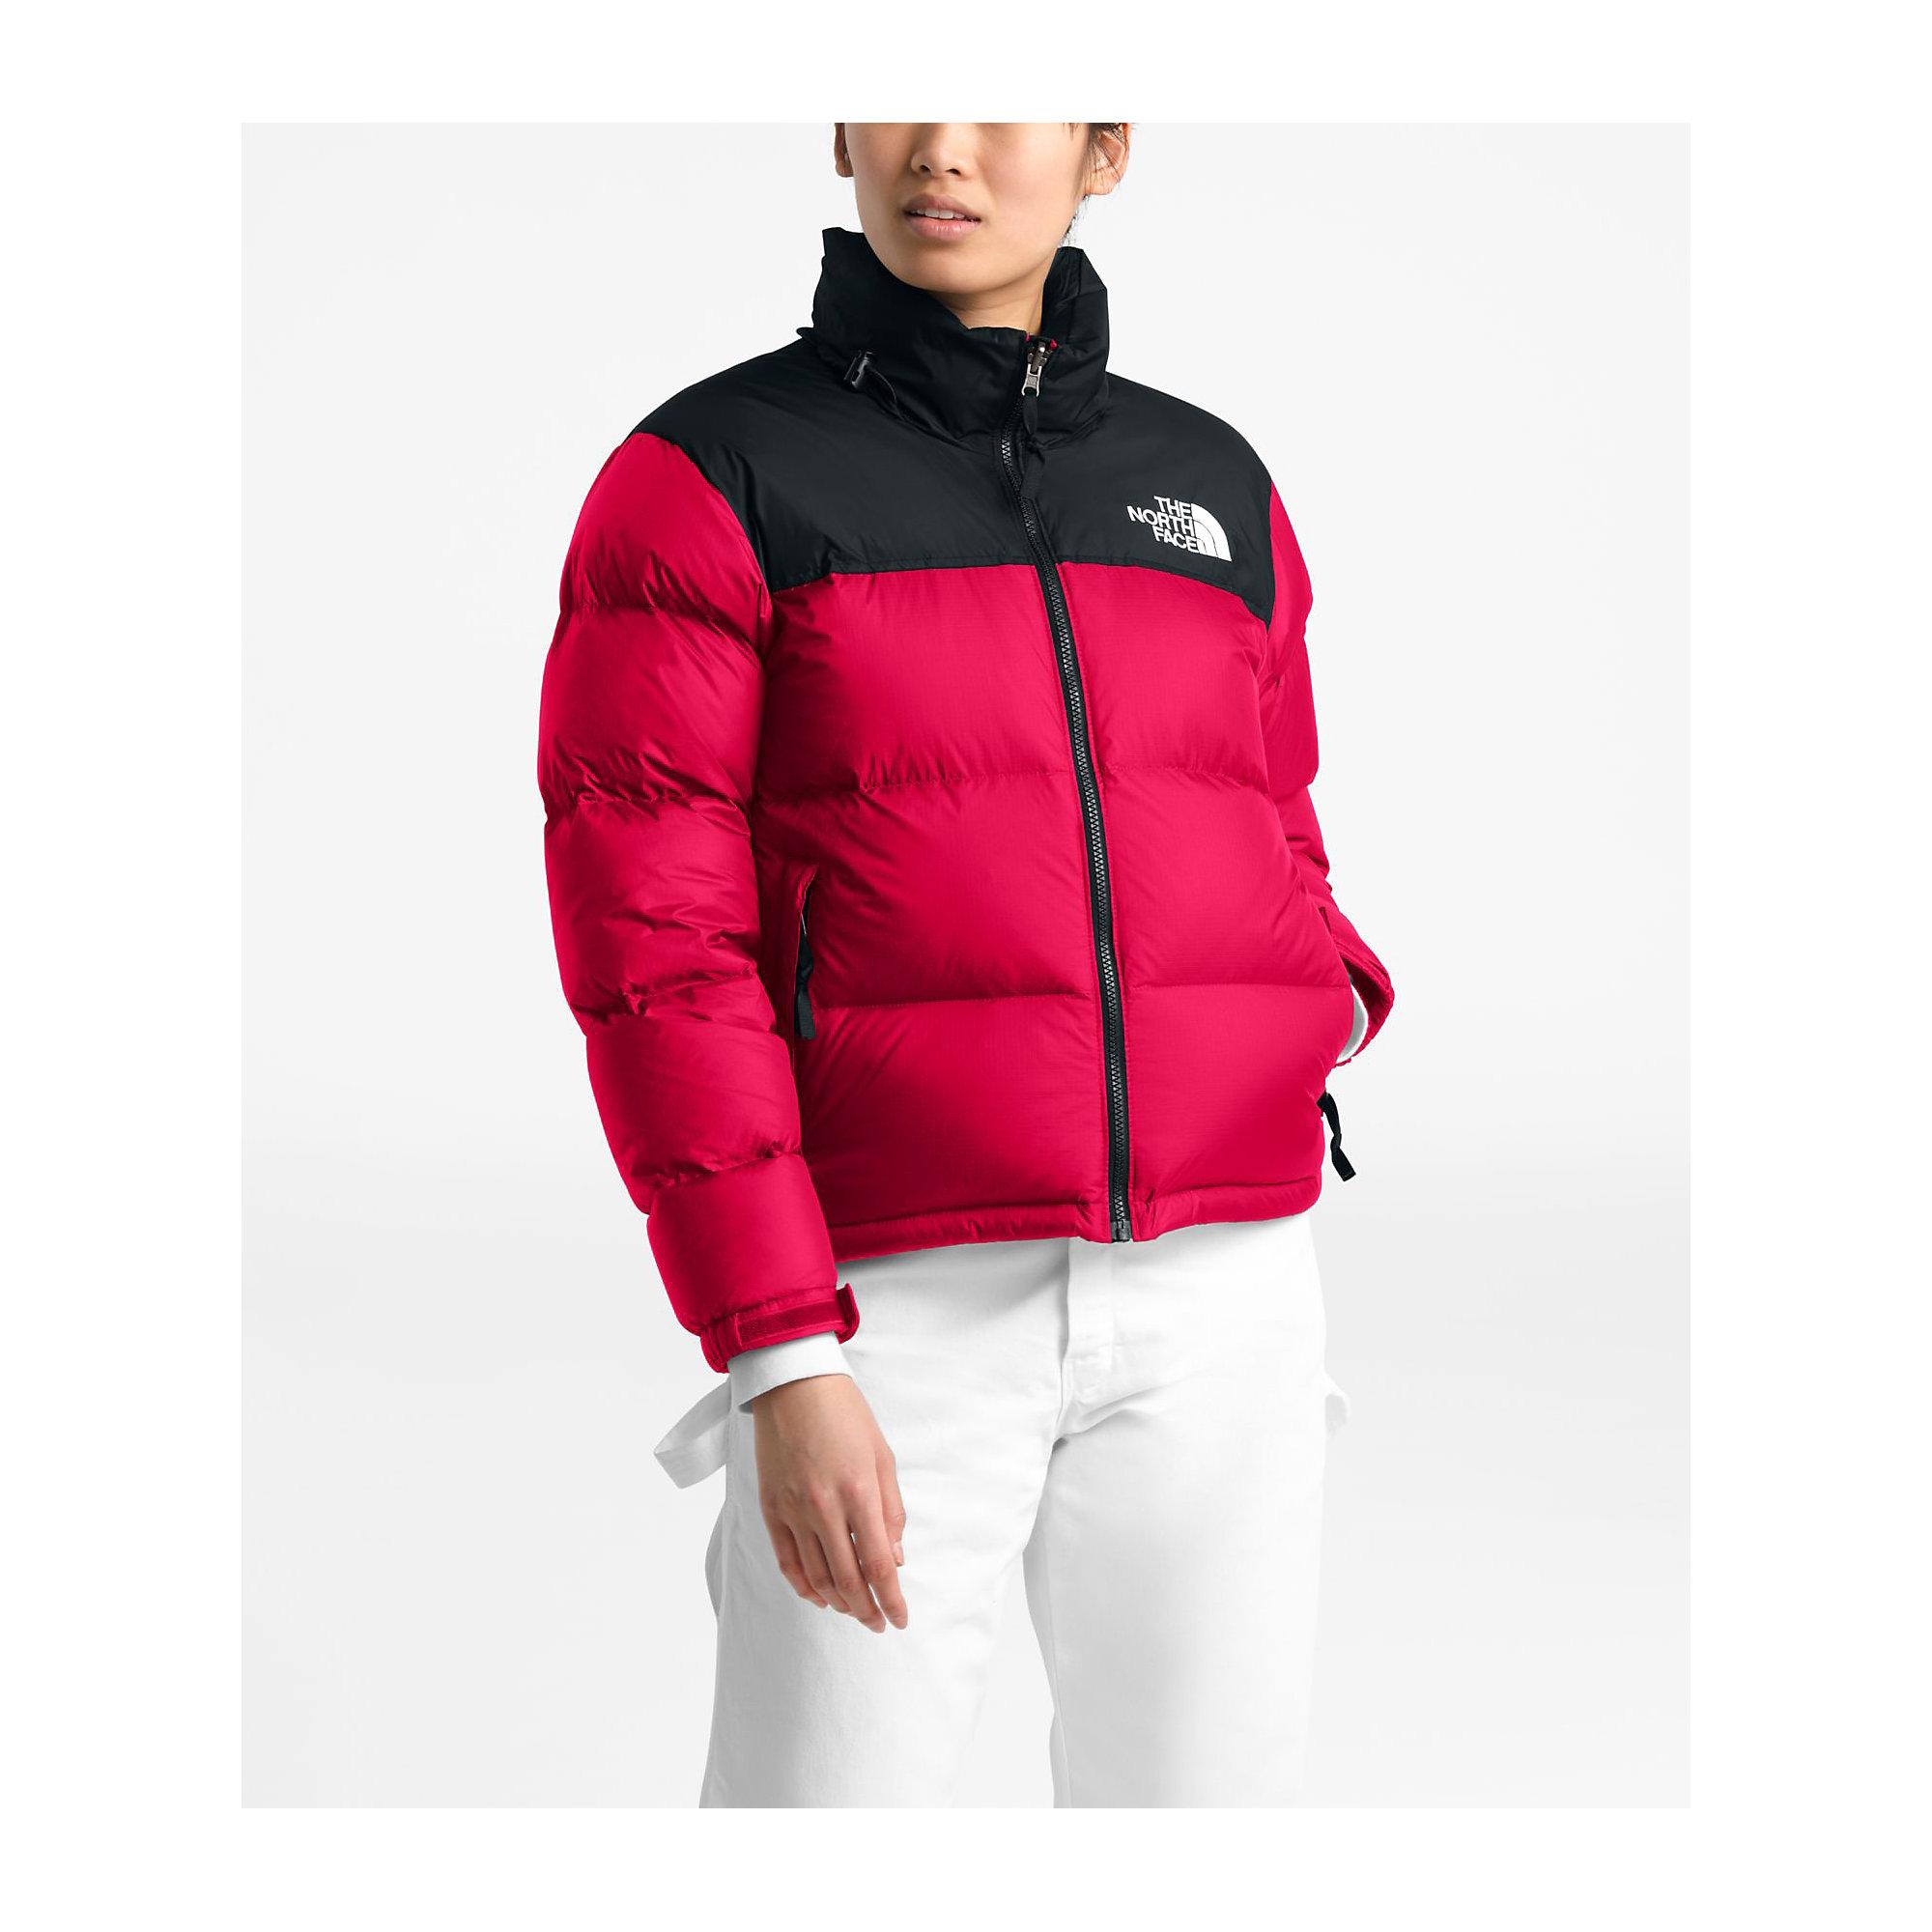 the north face nuptse jacket red